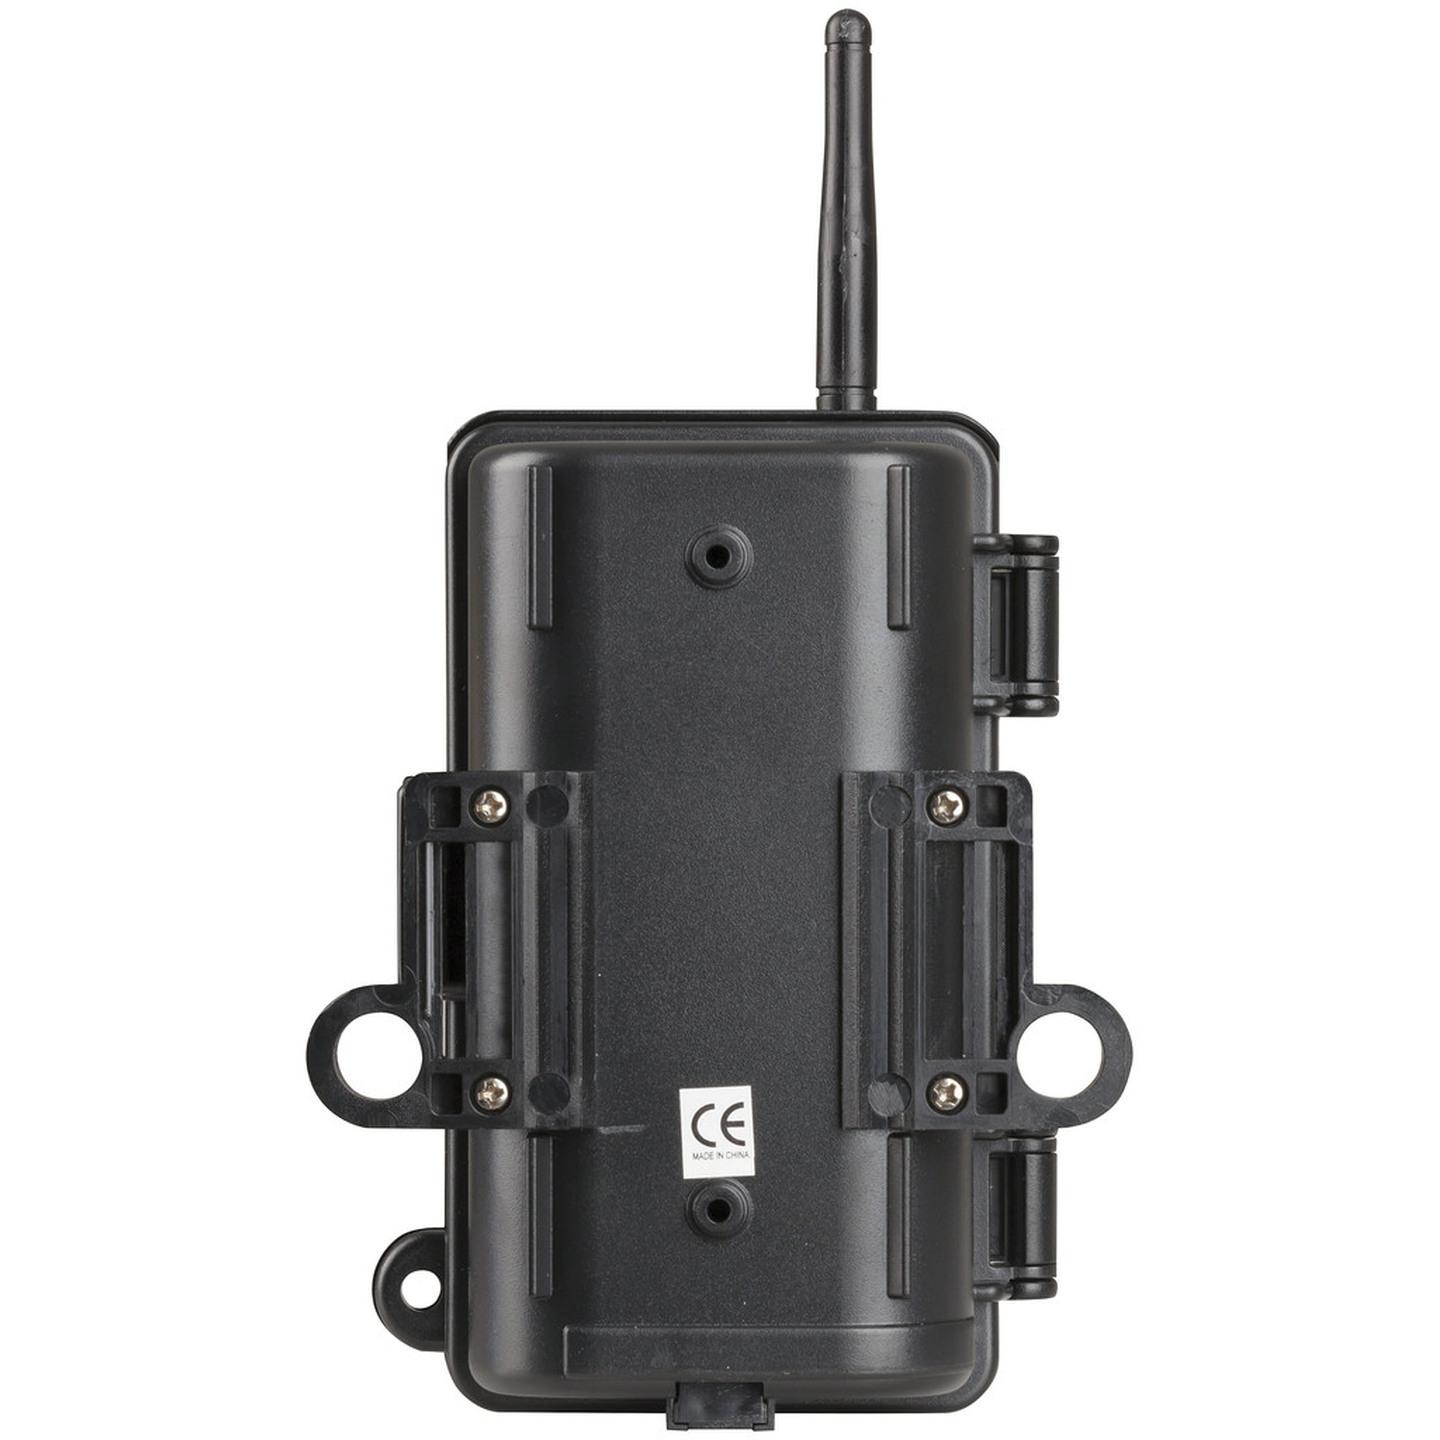 IR Wireless Flash to suit Outdoor Camera QC-8048